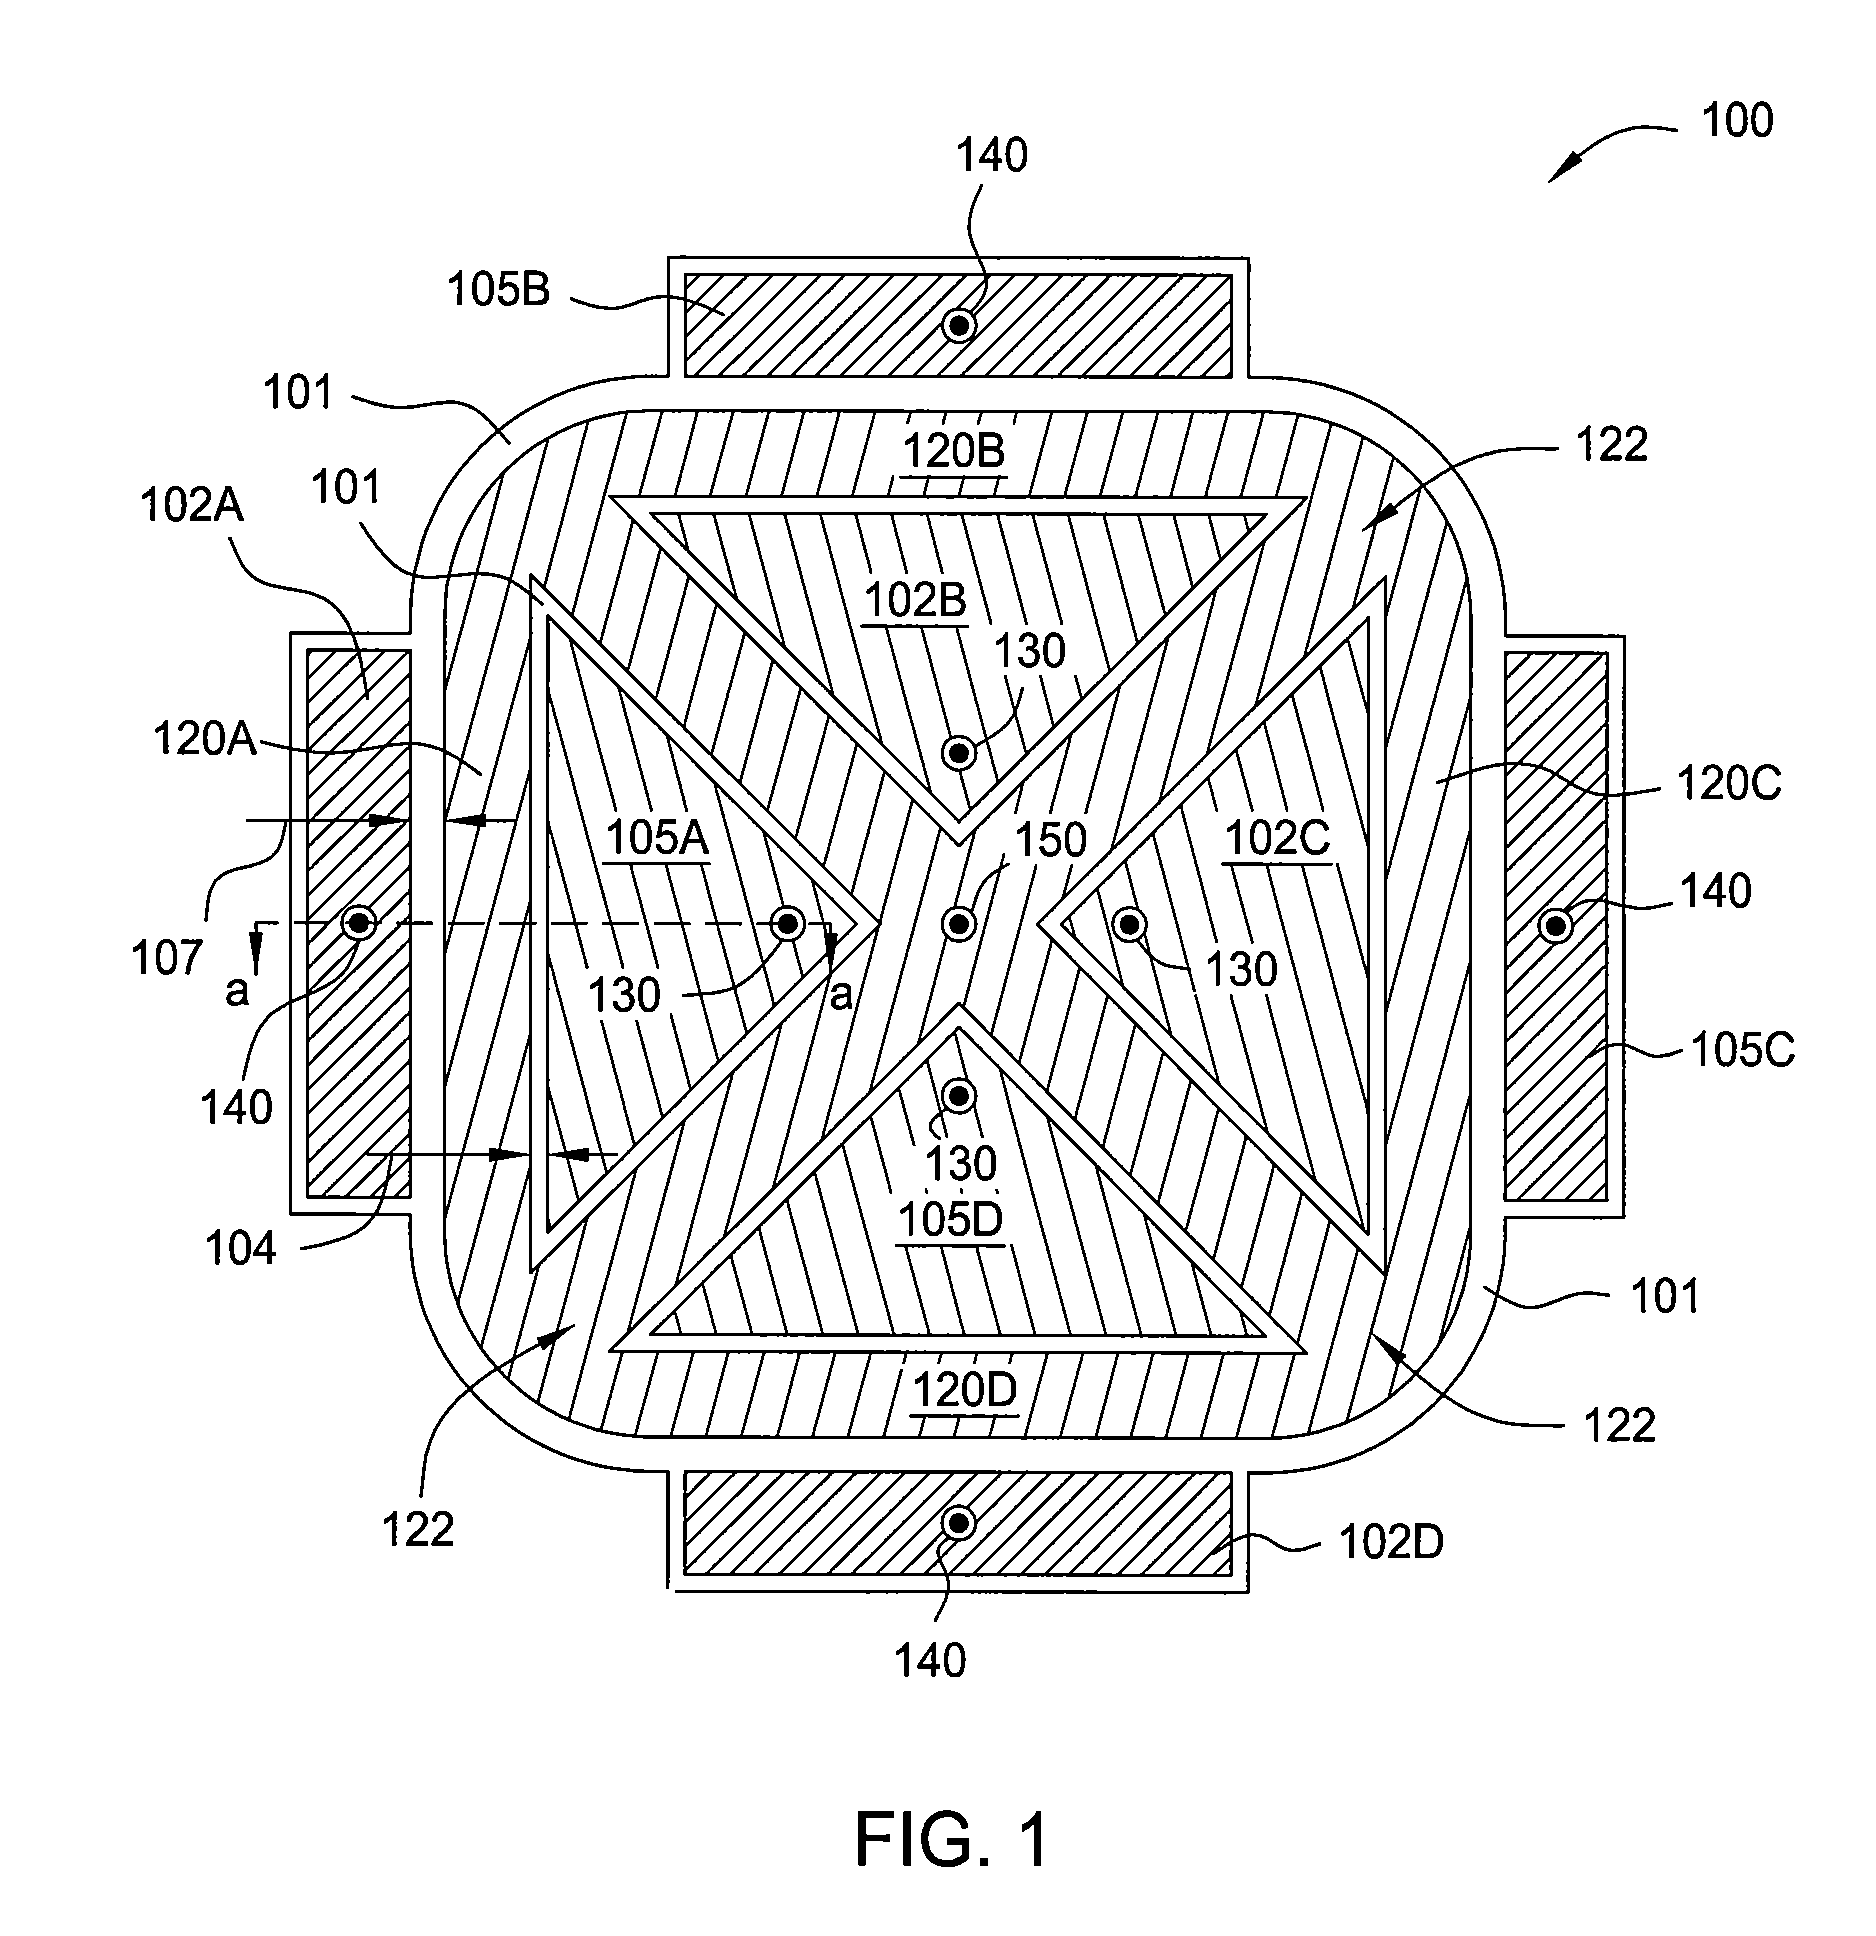 Ground strap for suppressing stiction during MEMS fabrication